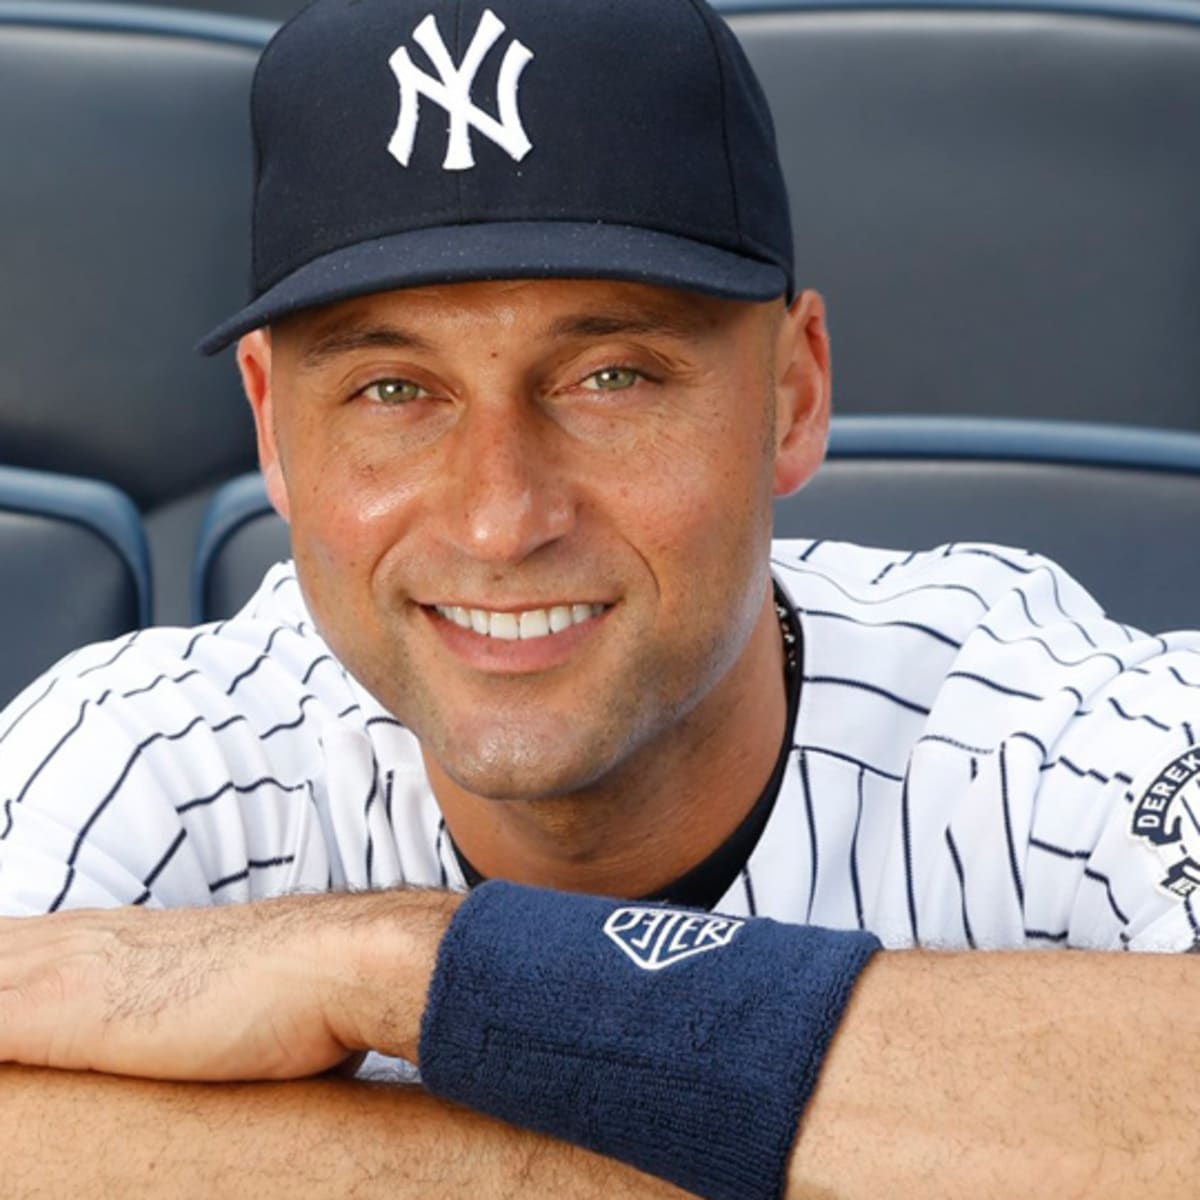 10 Things You May Not Know About Derek Jeter - Gyan 4 Help